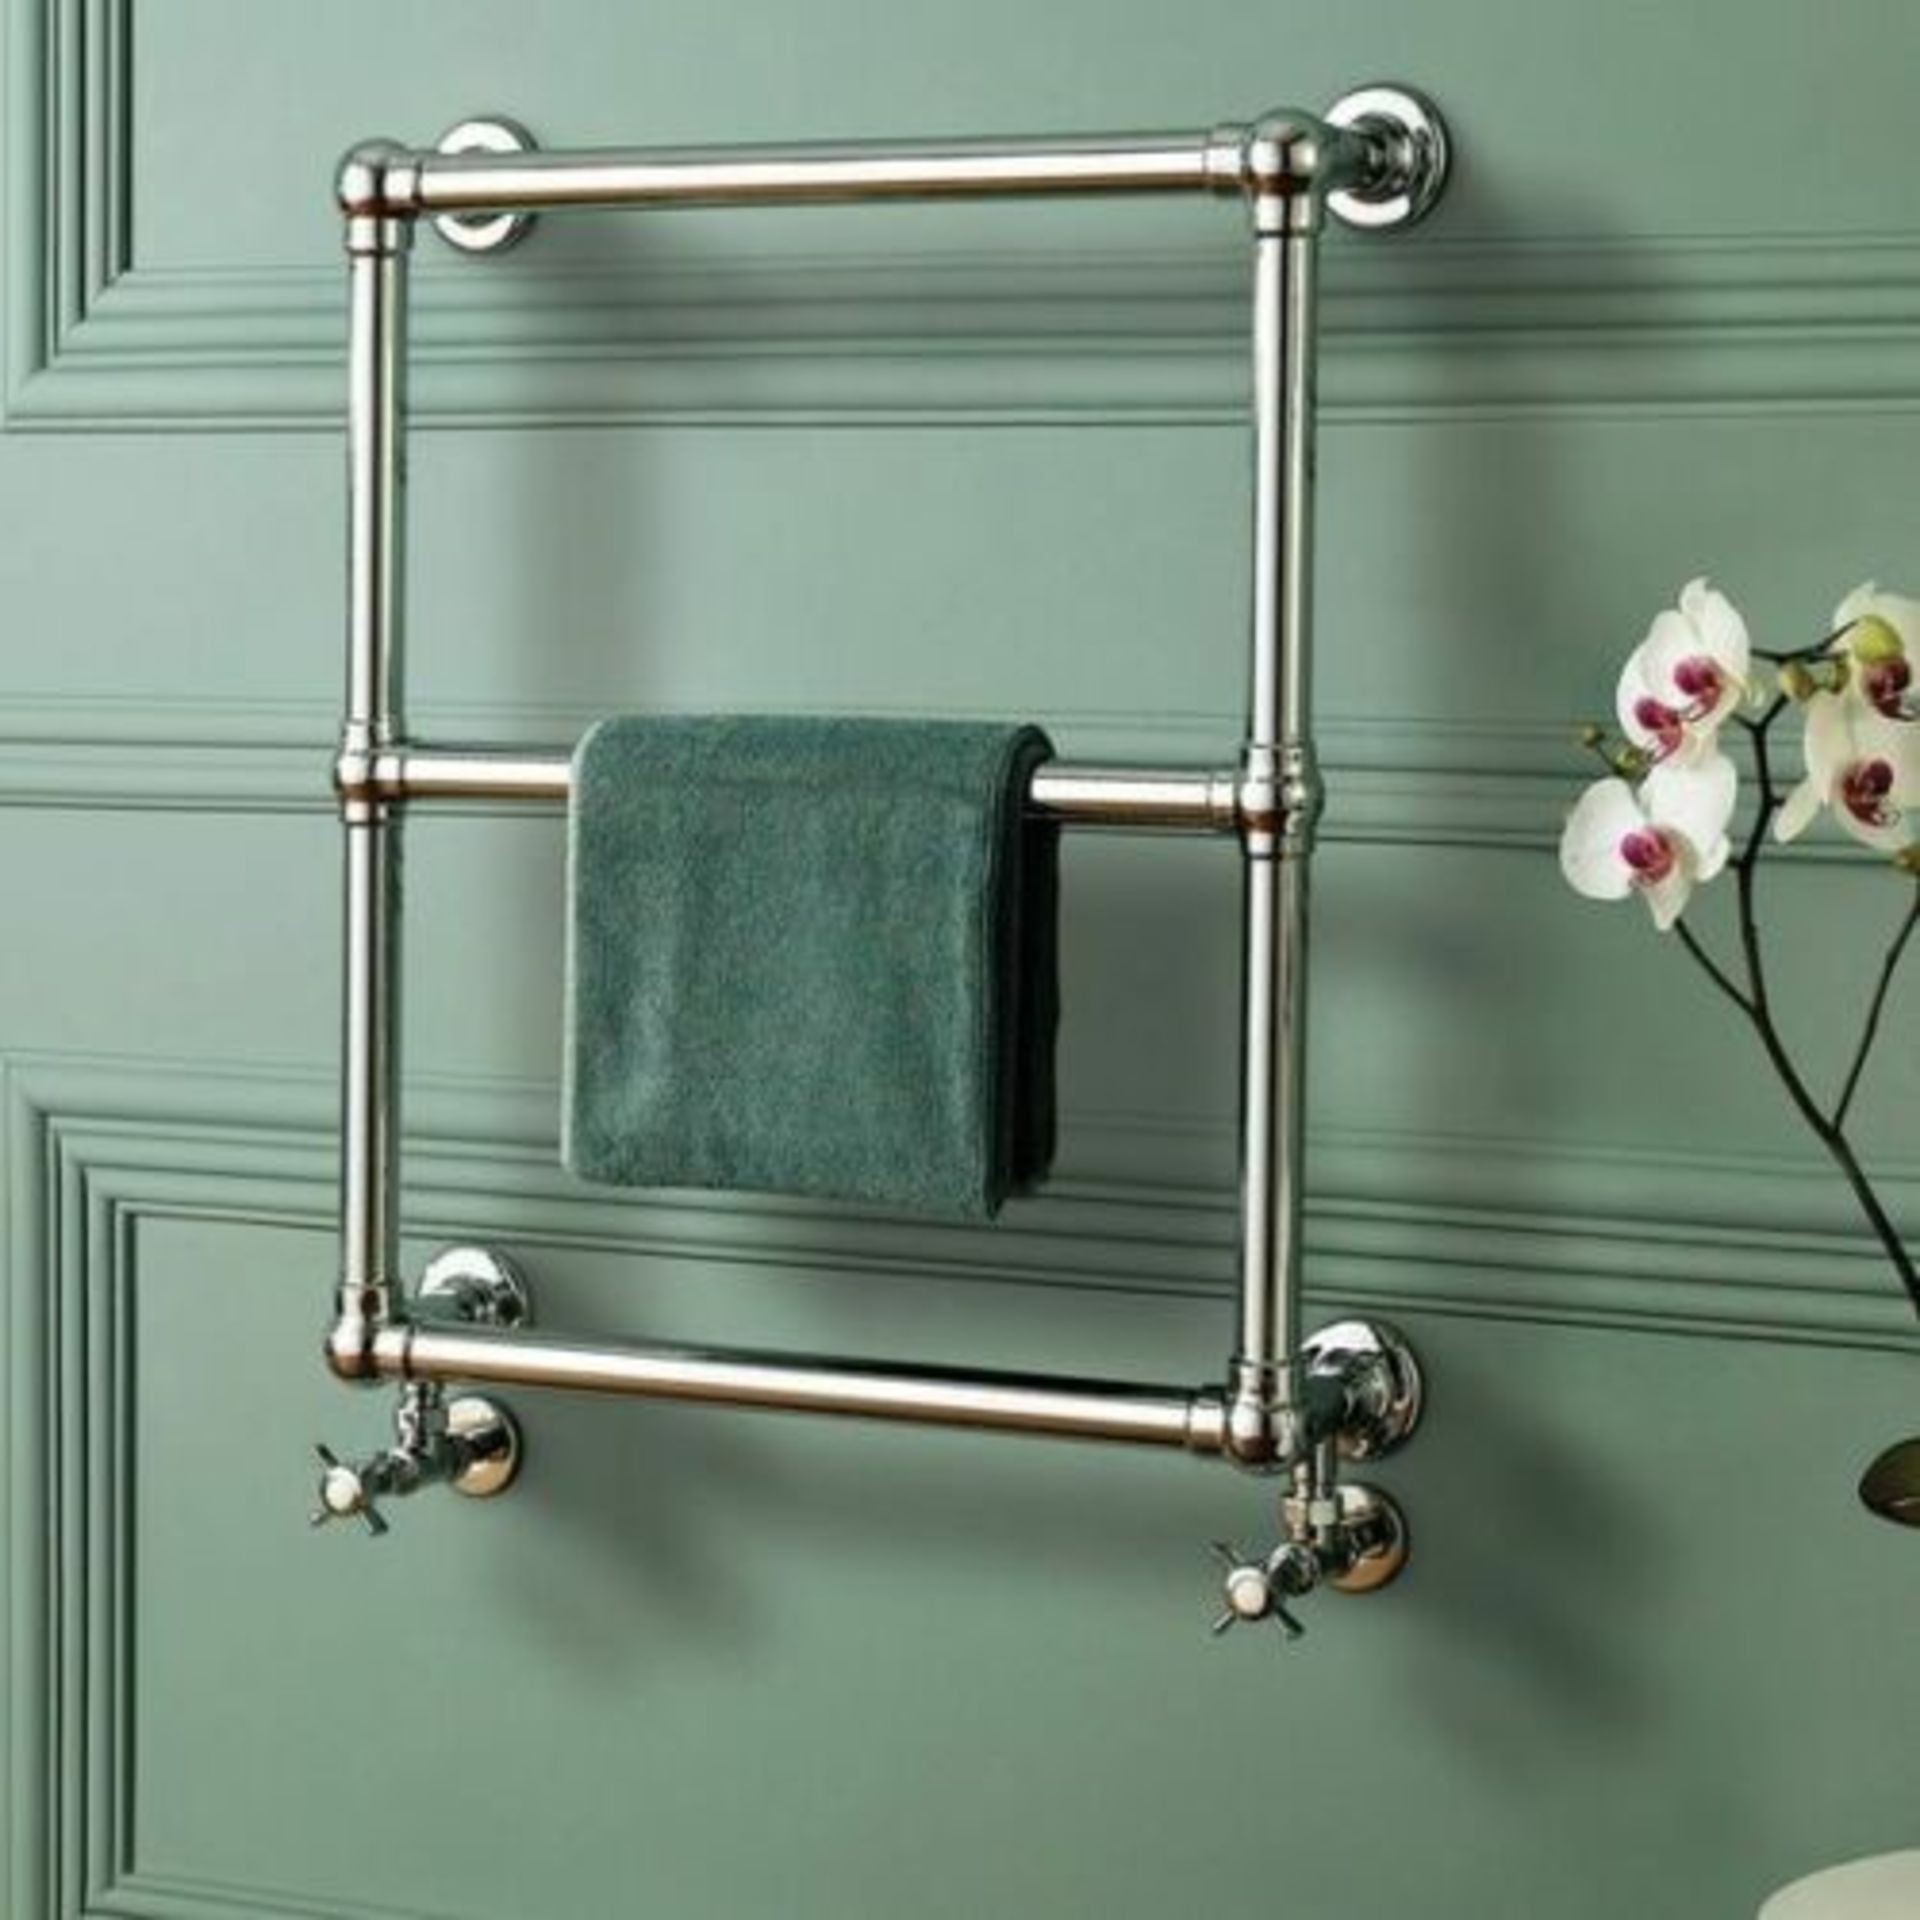 FERVENT TRADITIONAL BALL JOINTED TOWEL RADIATOR 686MM X 600MM BRAND NEW, FACTORY SEALED PACKAGING.